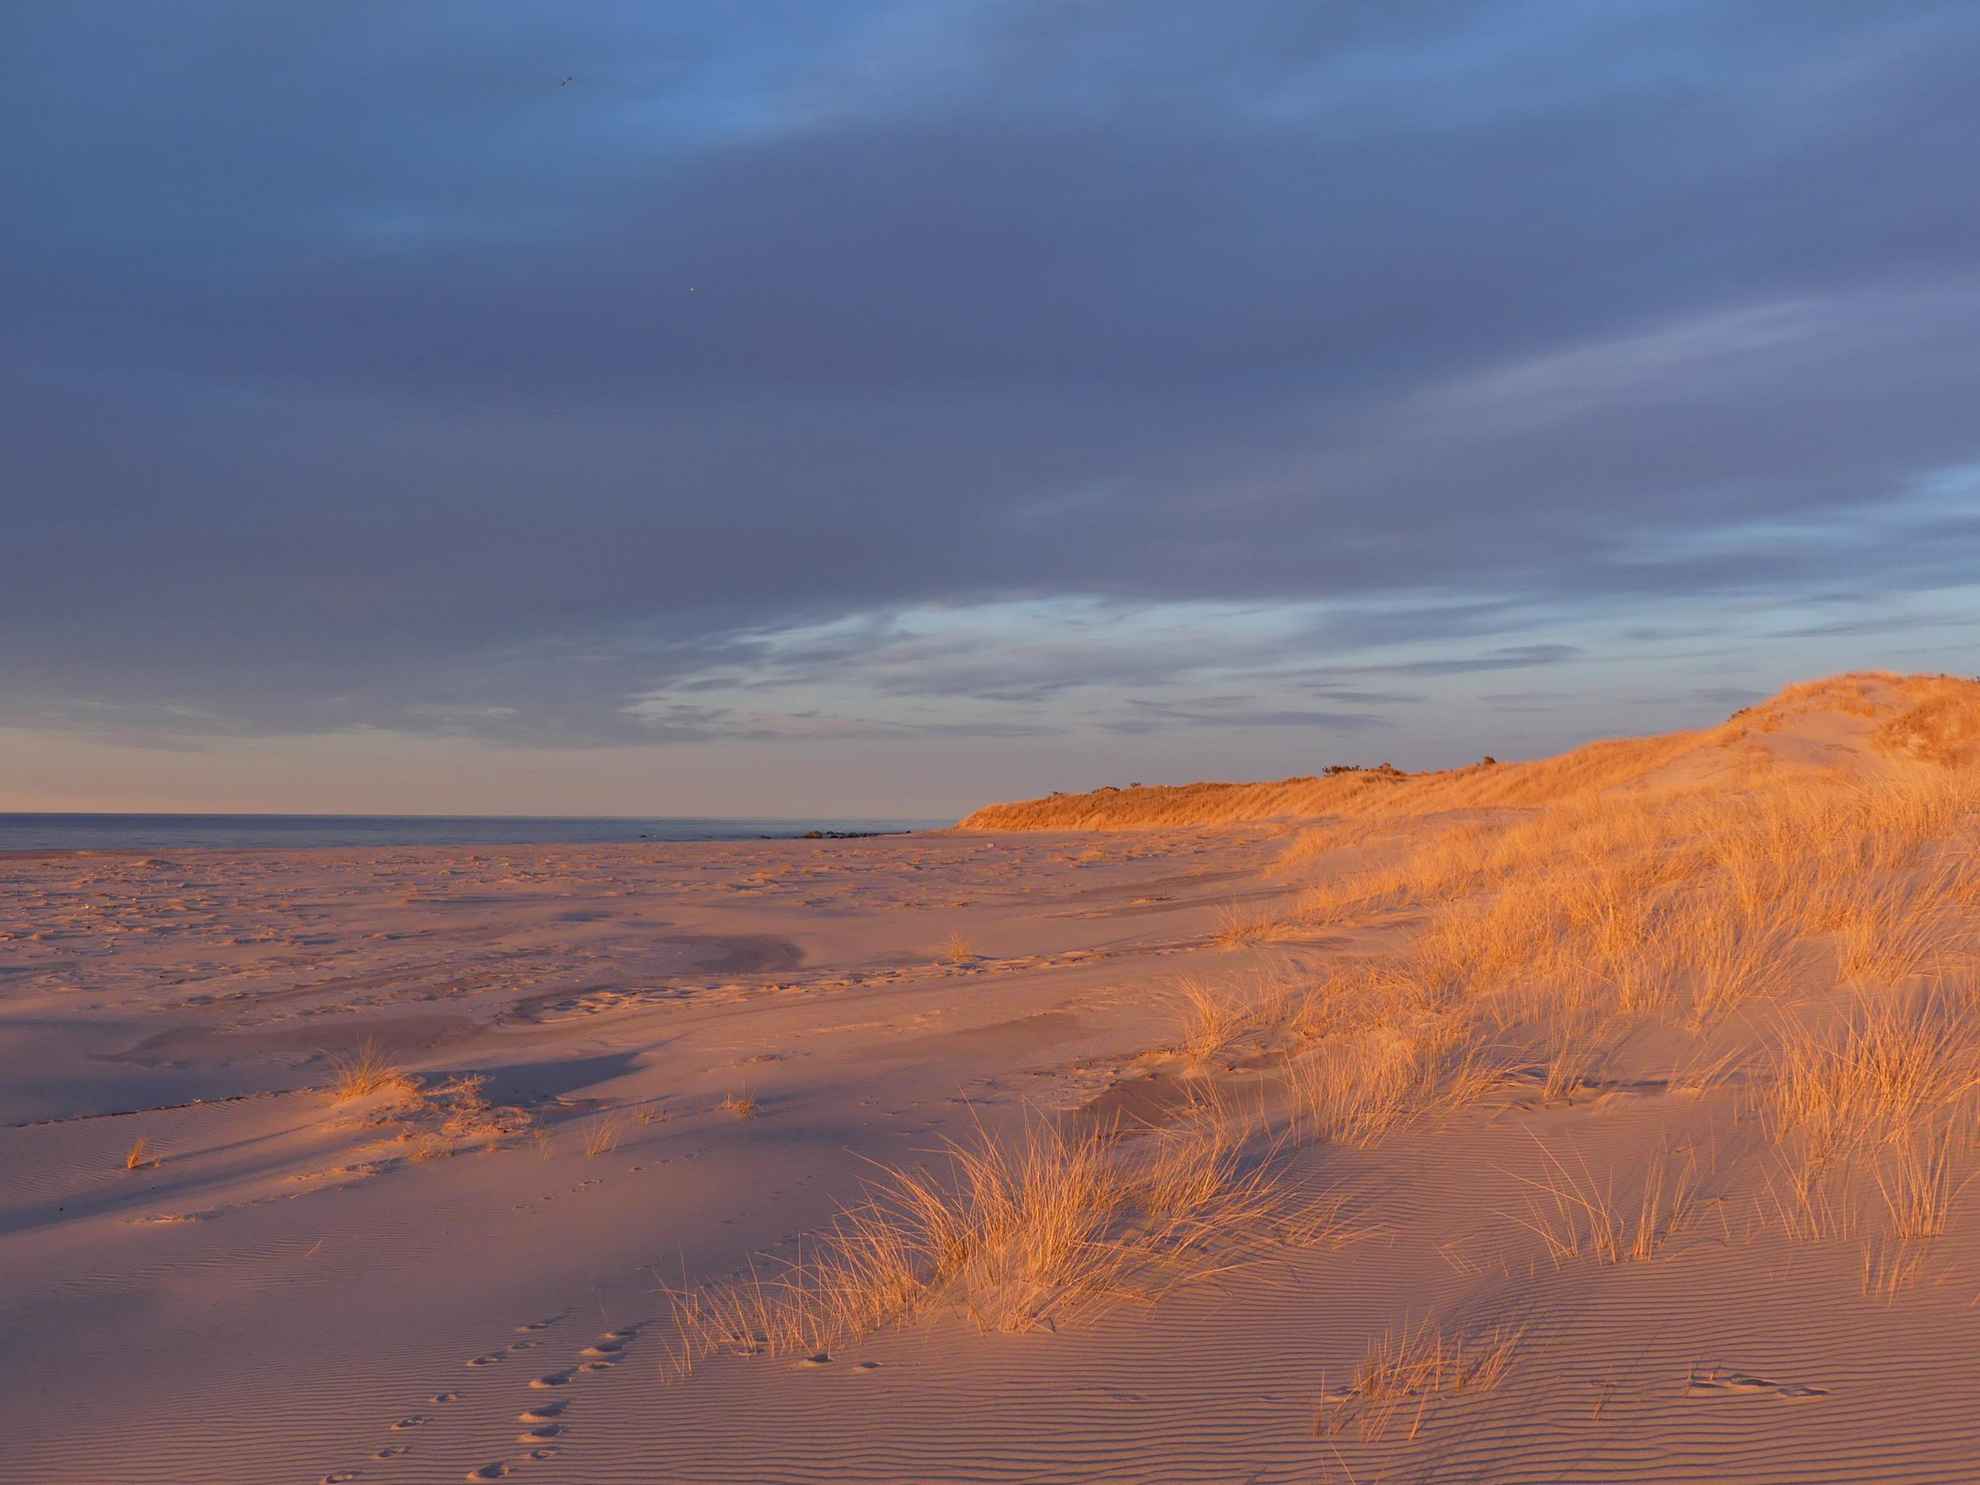 A beach with sandy dunes and golden grass on the edge. The sea can be seen at the far end.